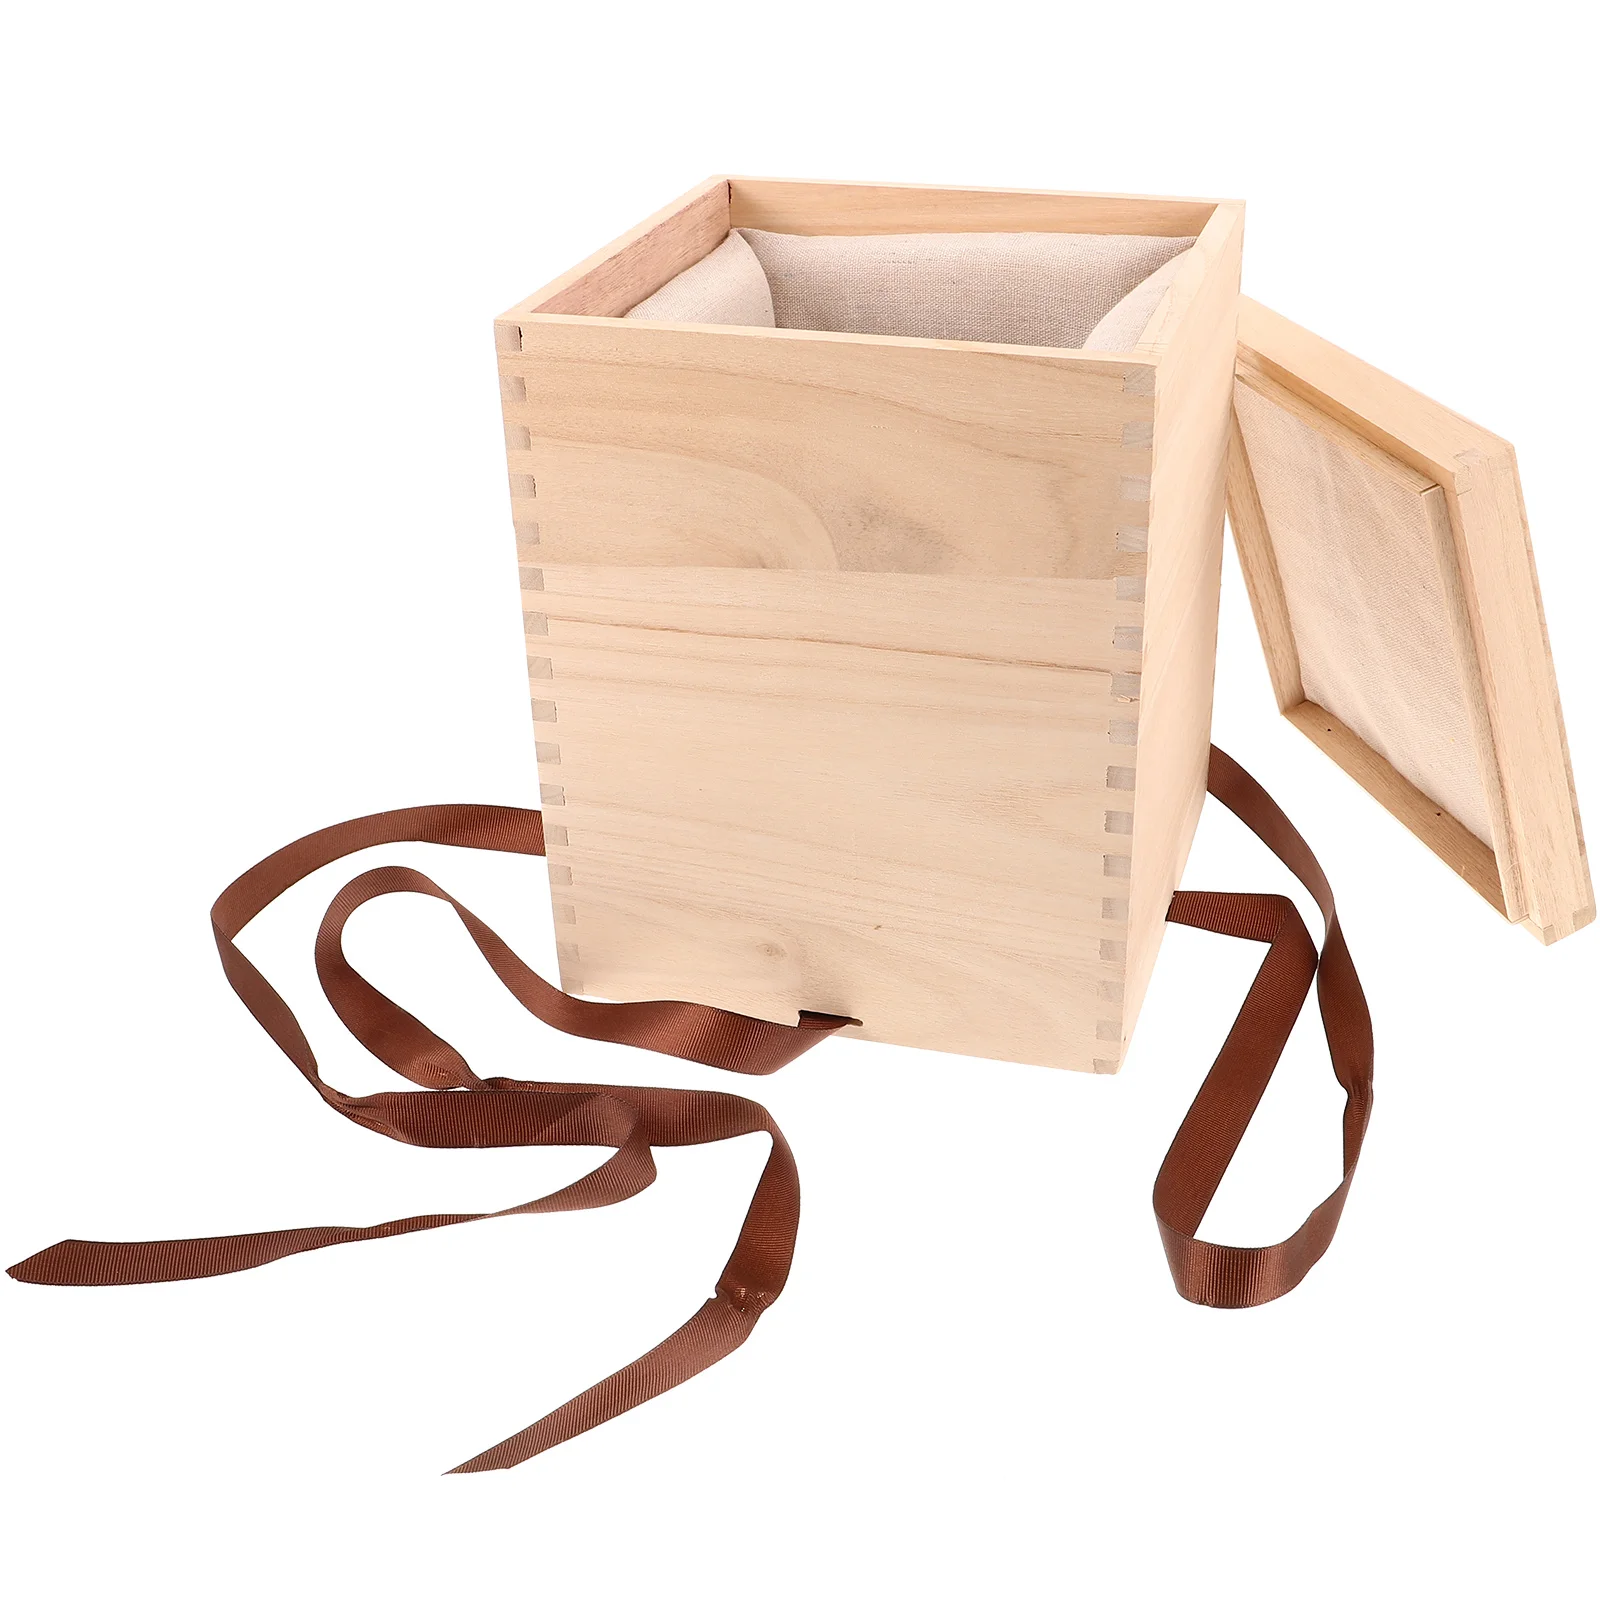 

Wooden Box Teacup Gift Wrapping Box Household Vase Storage Box Display Box